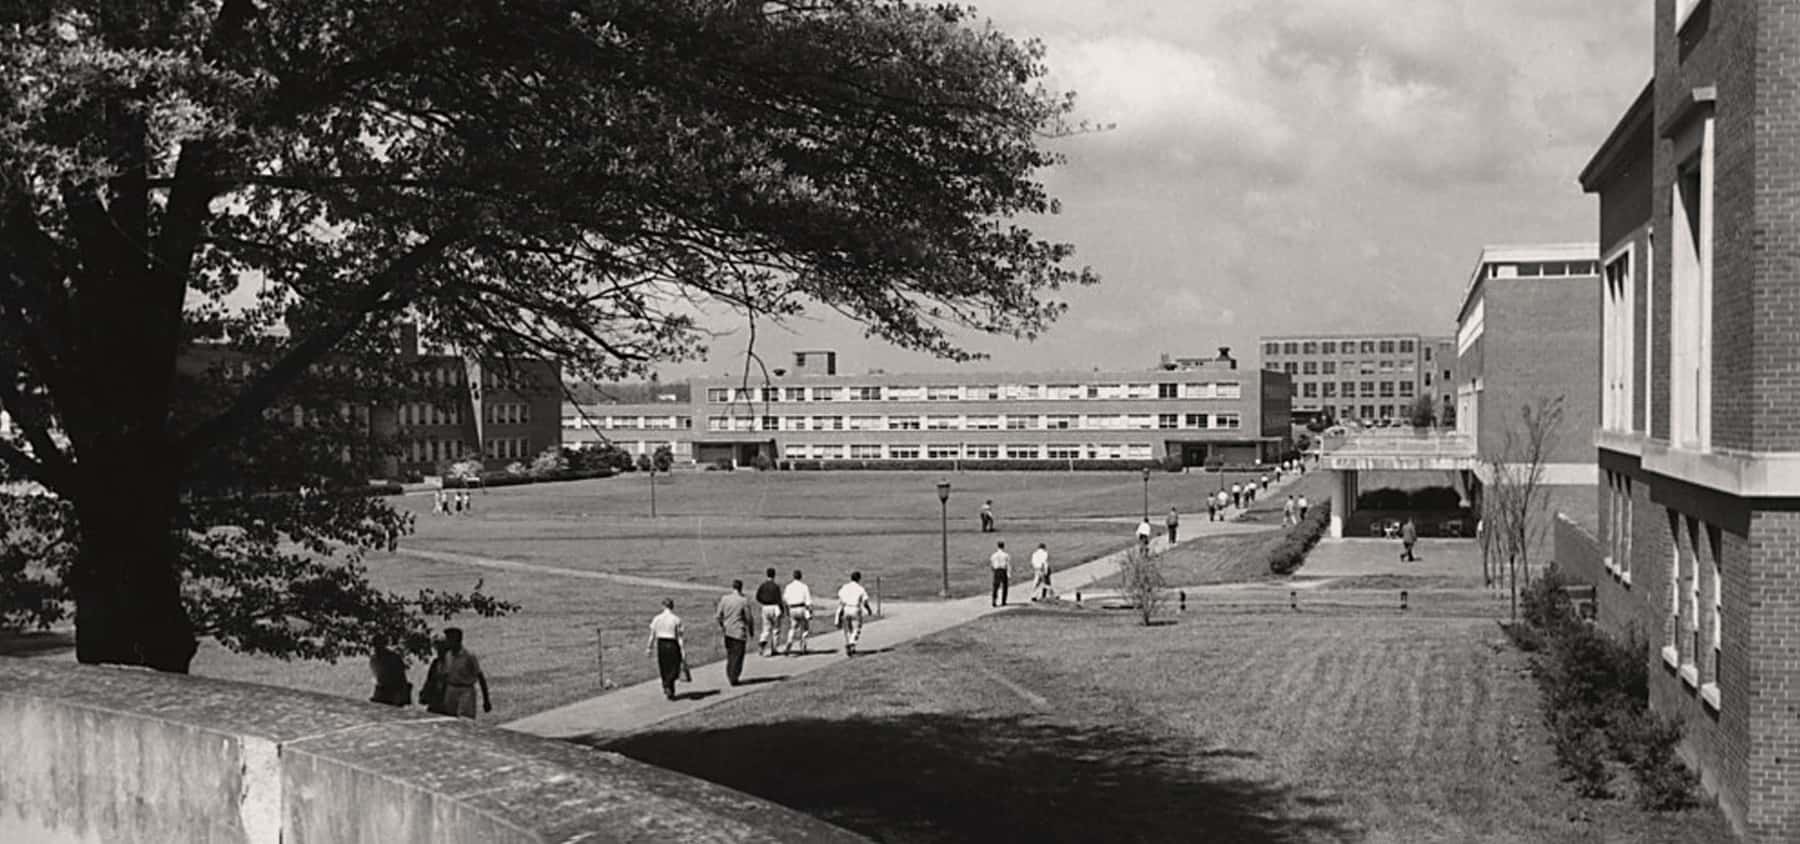 The brickyard area of campus before it was bricks